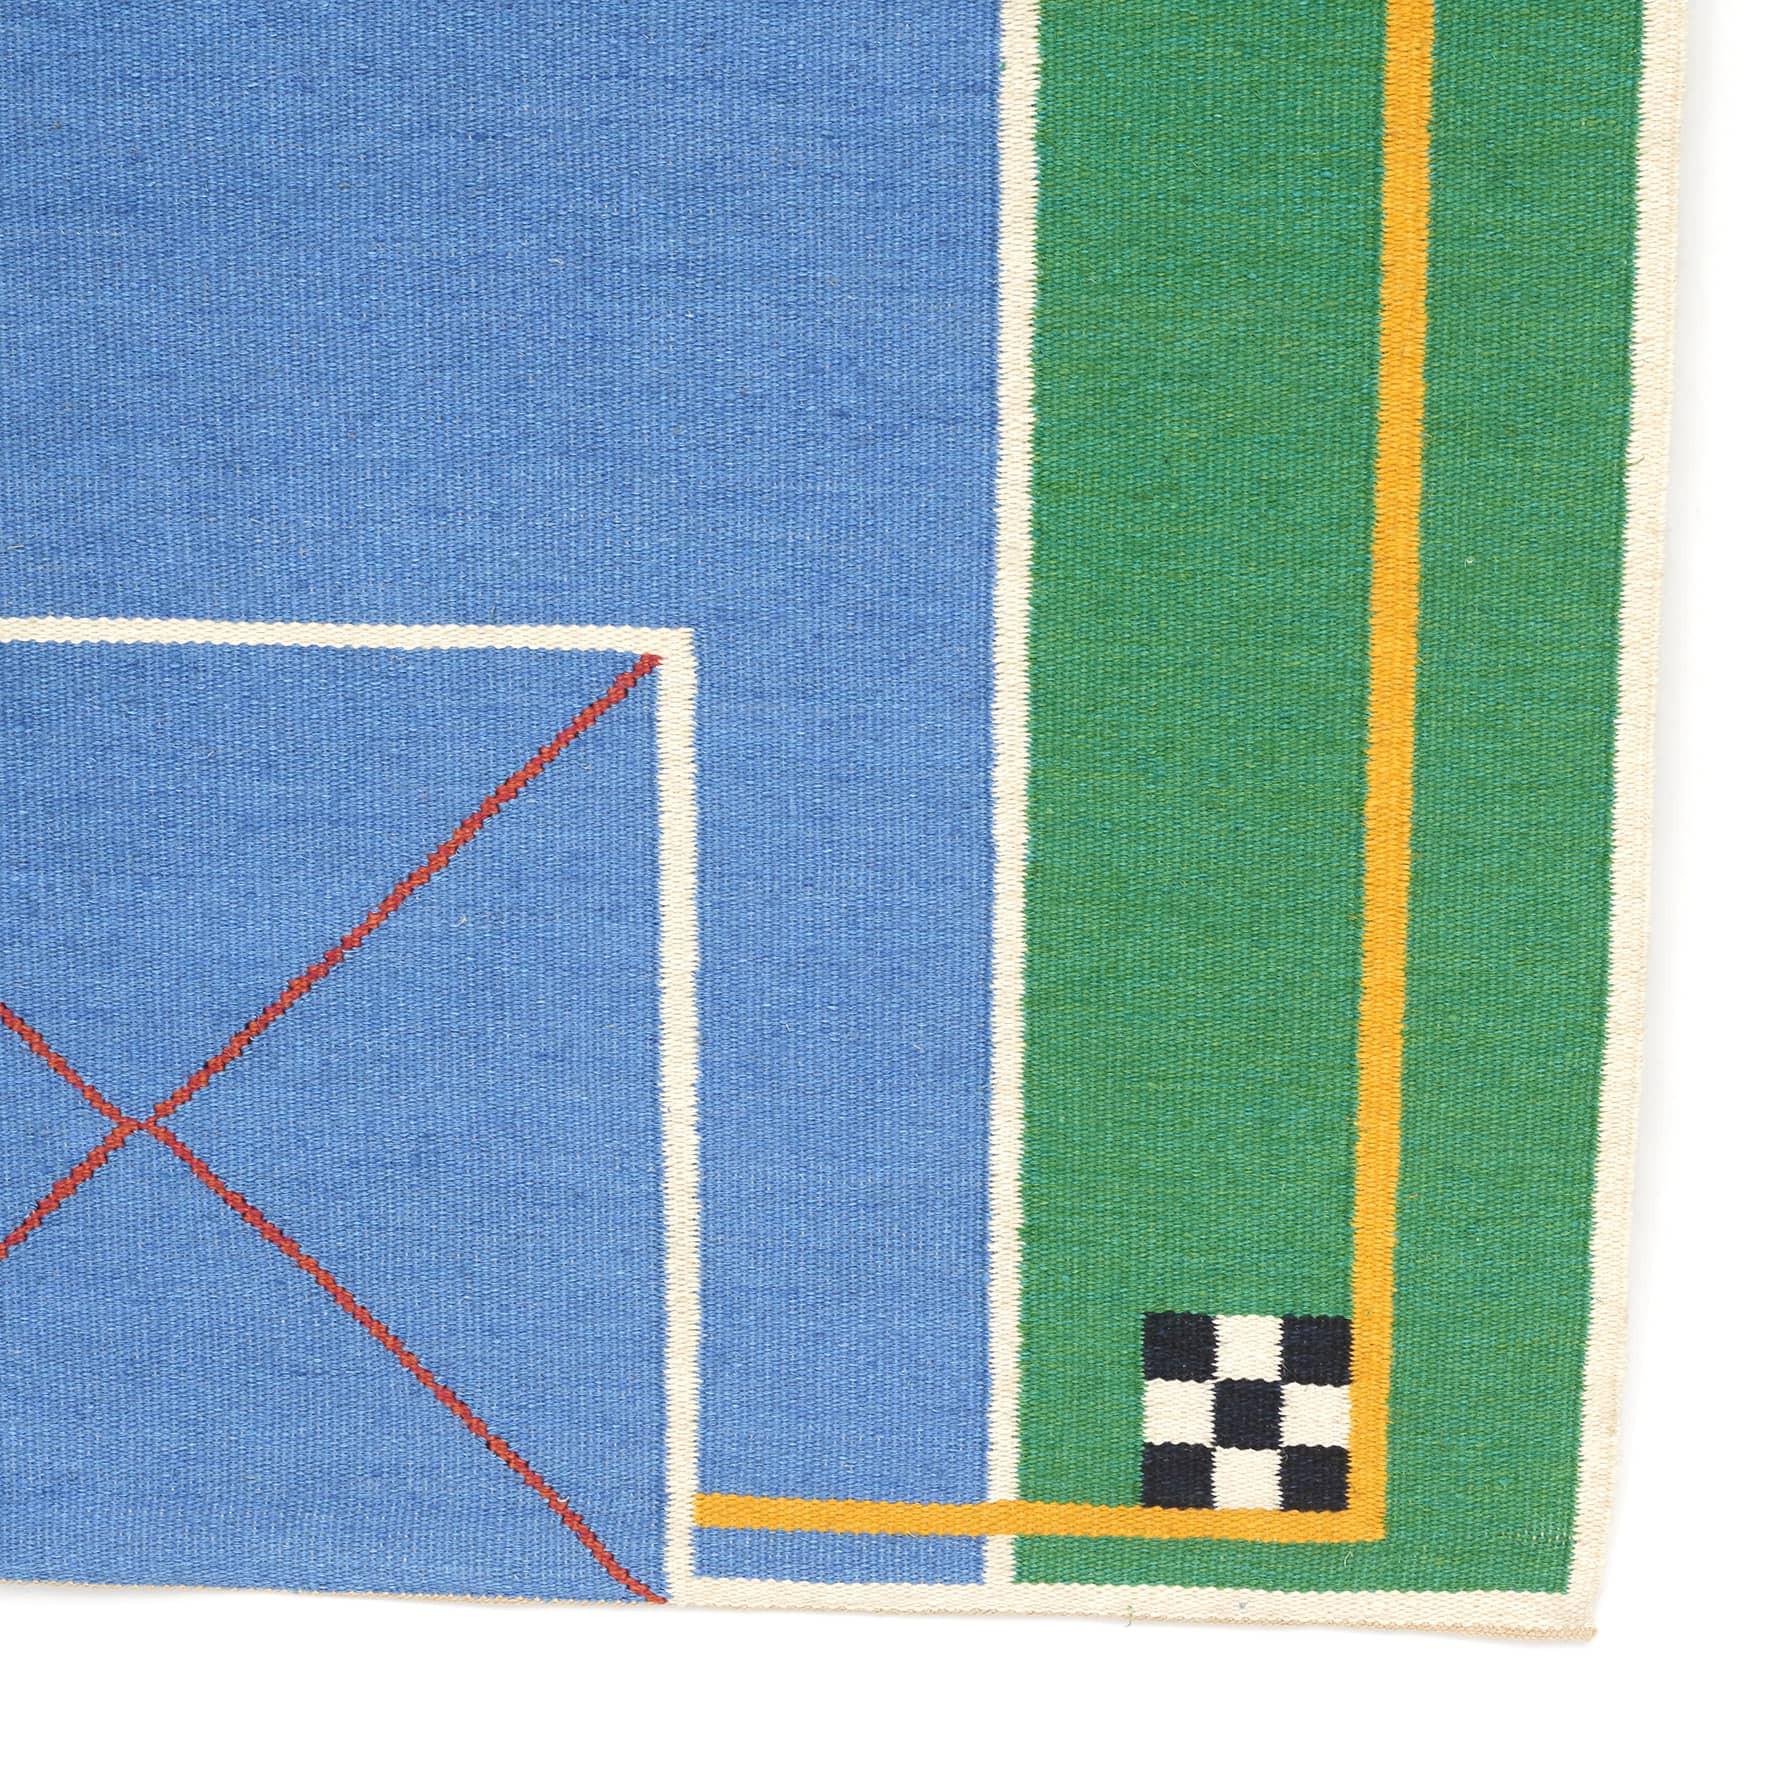 Gudrun Pagter (Born 1946)
Hand-woven tapestry made of sisal and linen. high summer.
Concrete and geometric design idiom with polychrome colors.
1985 - Title 